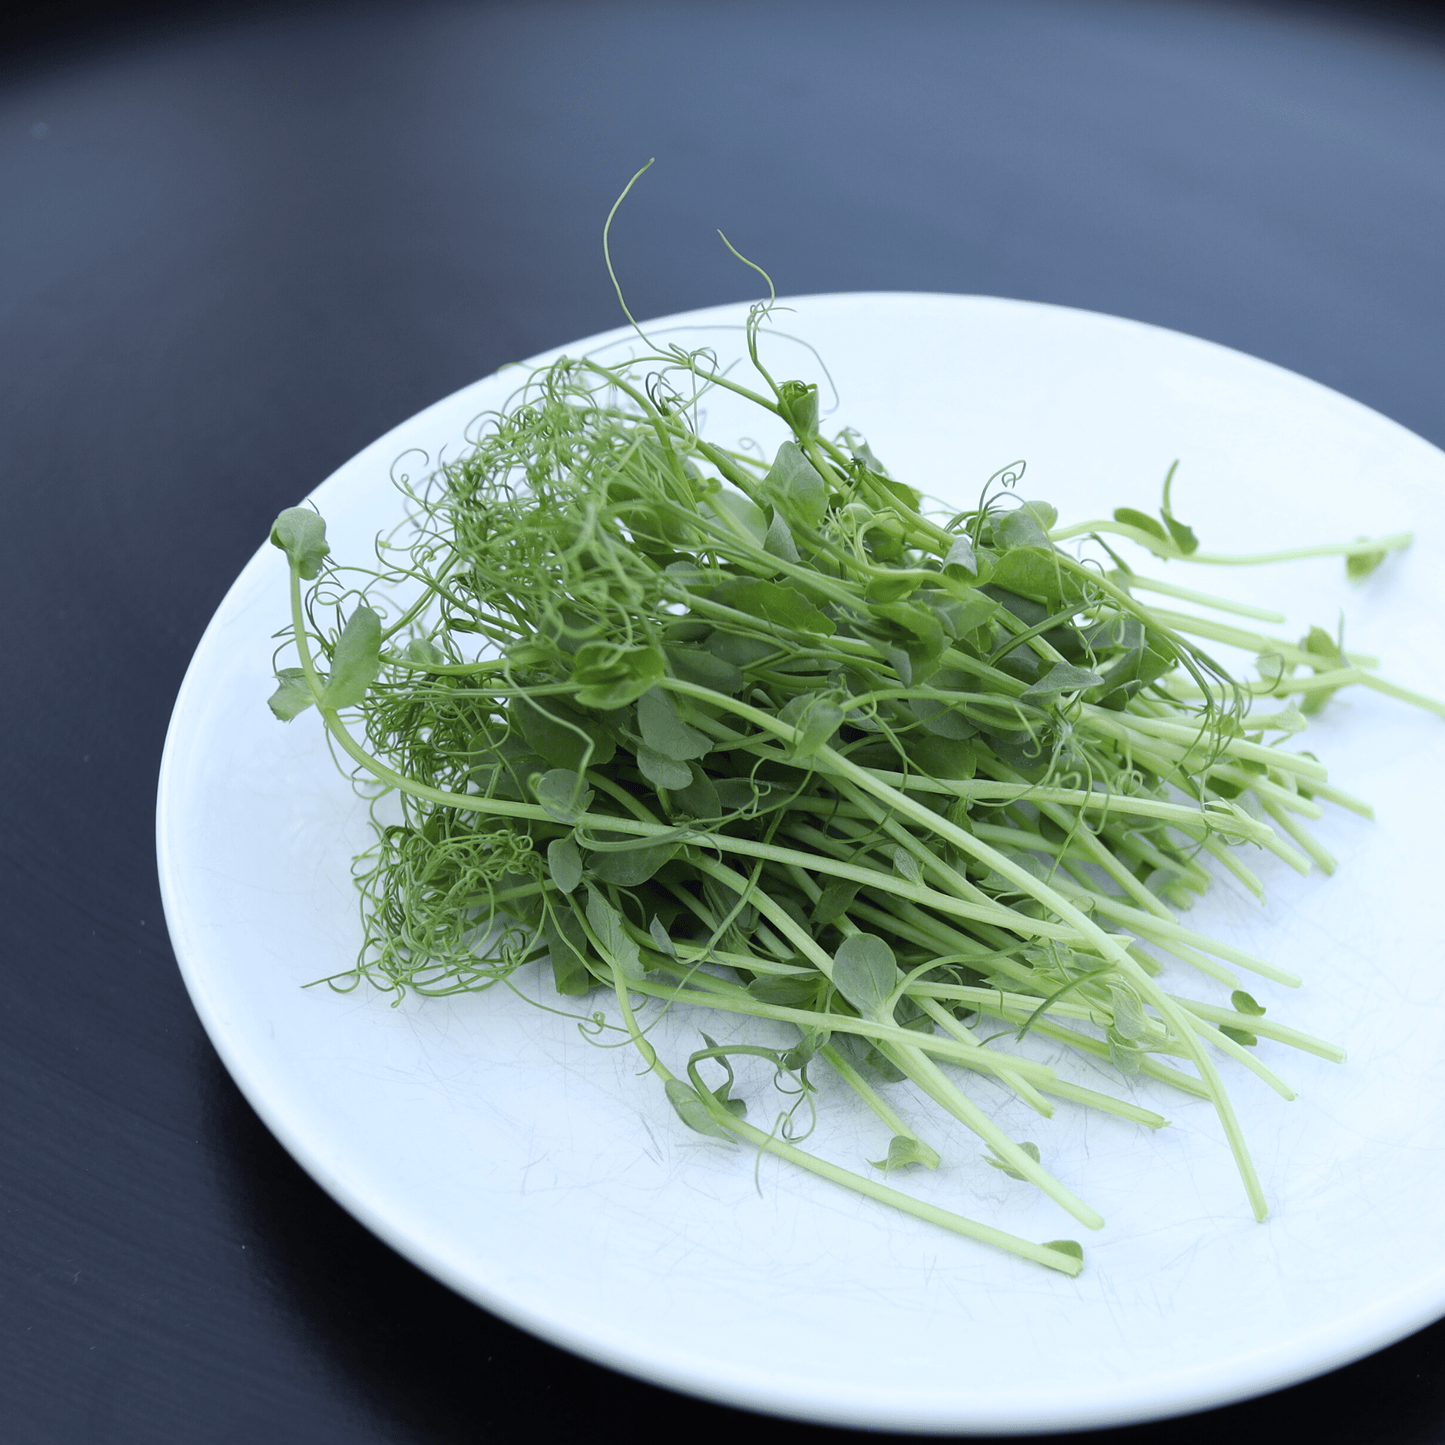 Pea Shoots - ONE-OFF PURCHASE